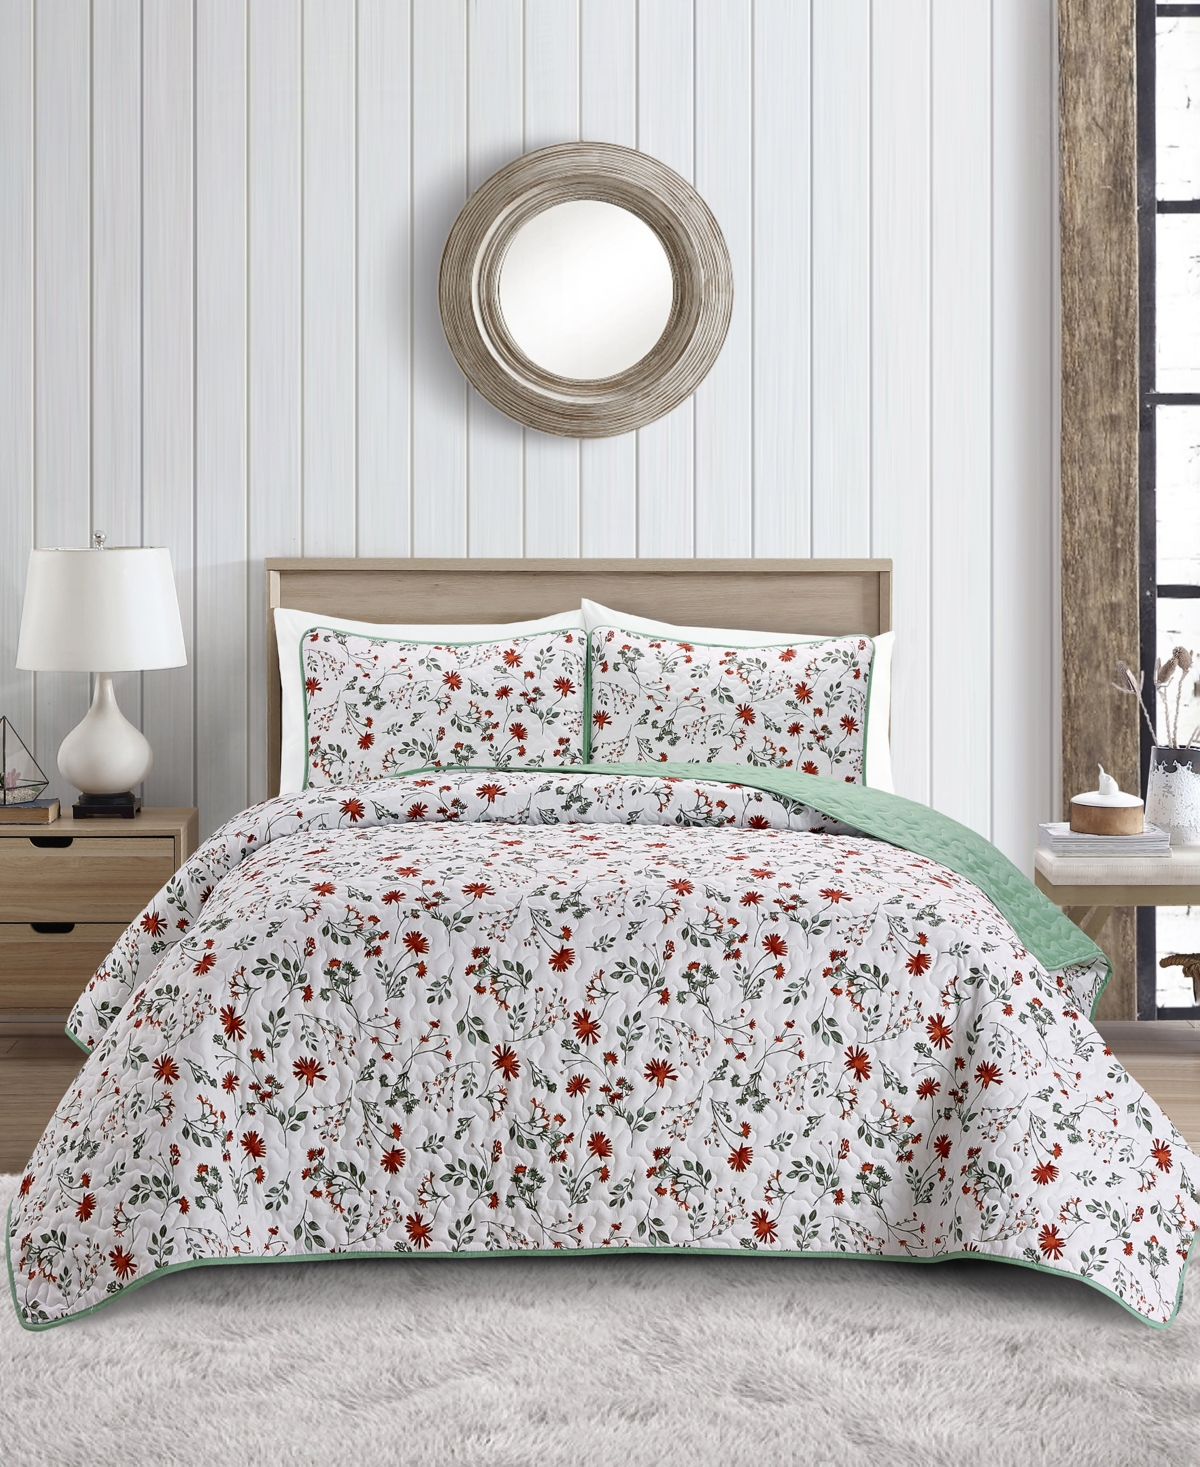 Videri Home Floral Botanical 3 Piece Quilt Set, Full-queen In Green Multi